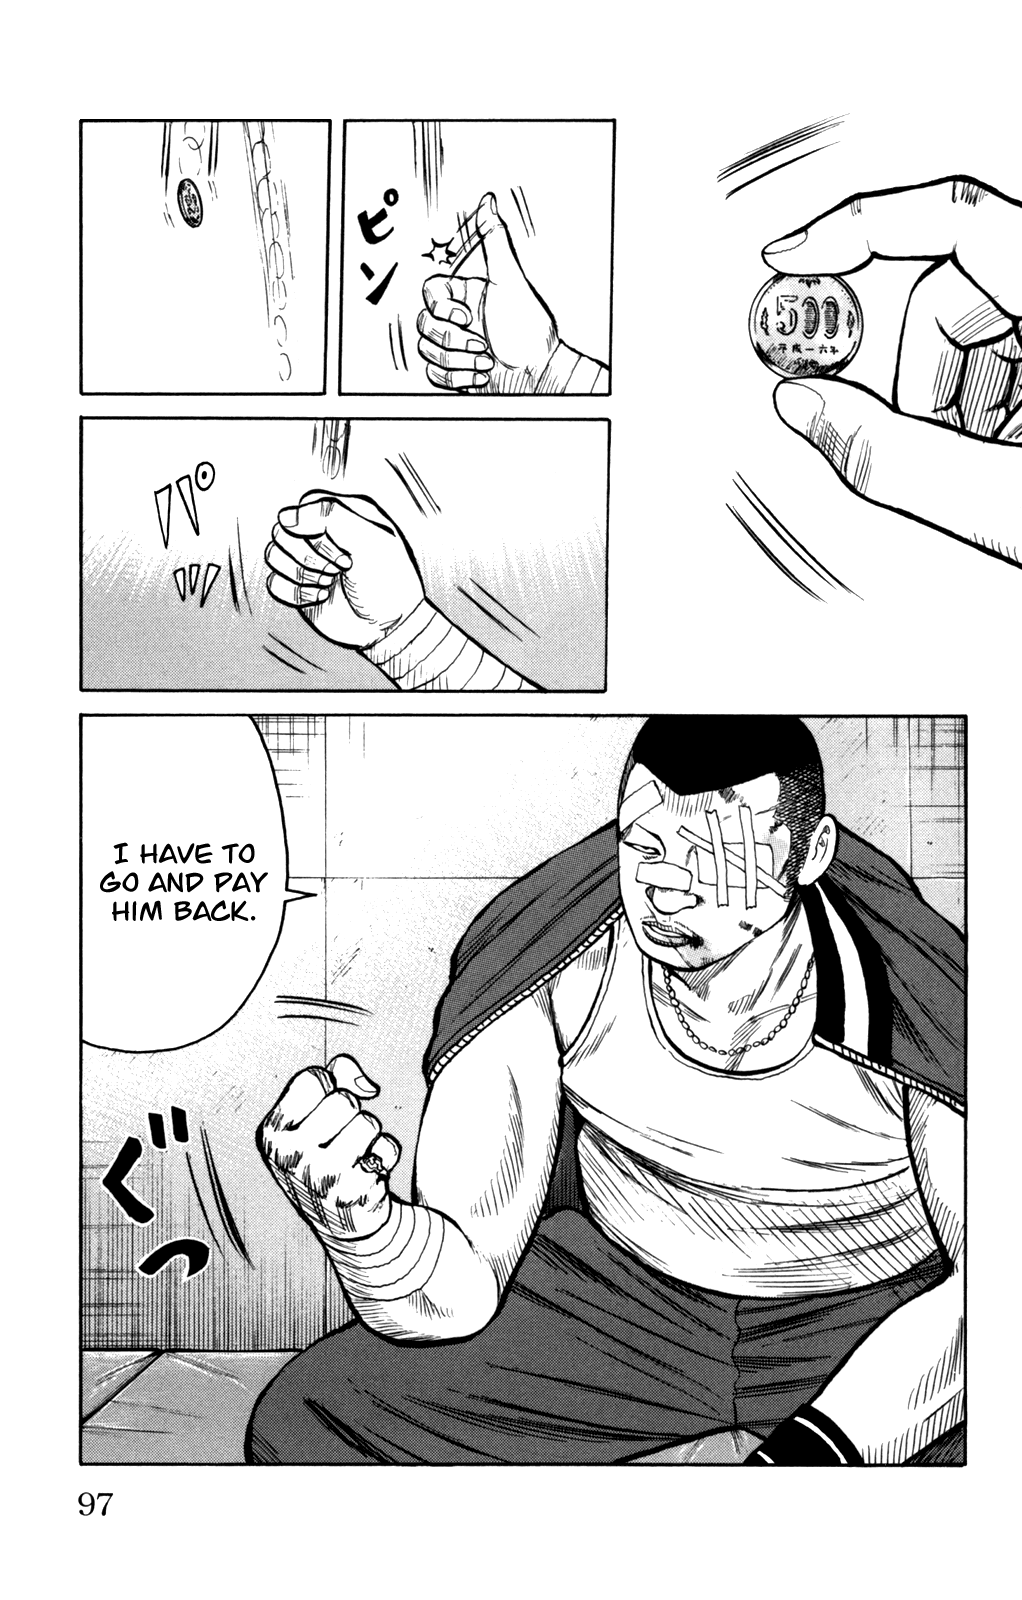 Worst - Page 1